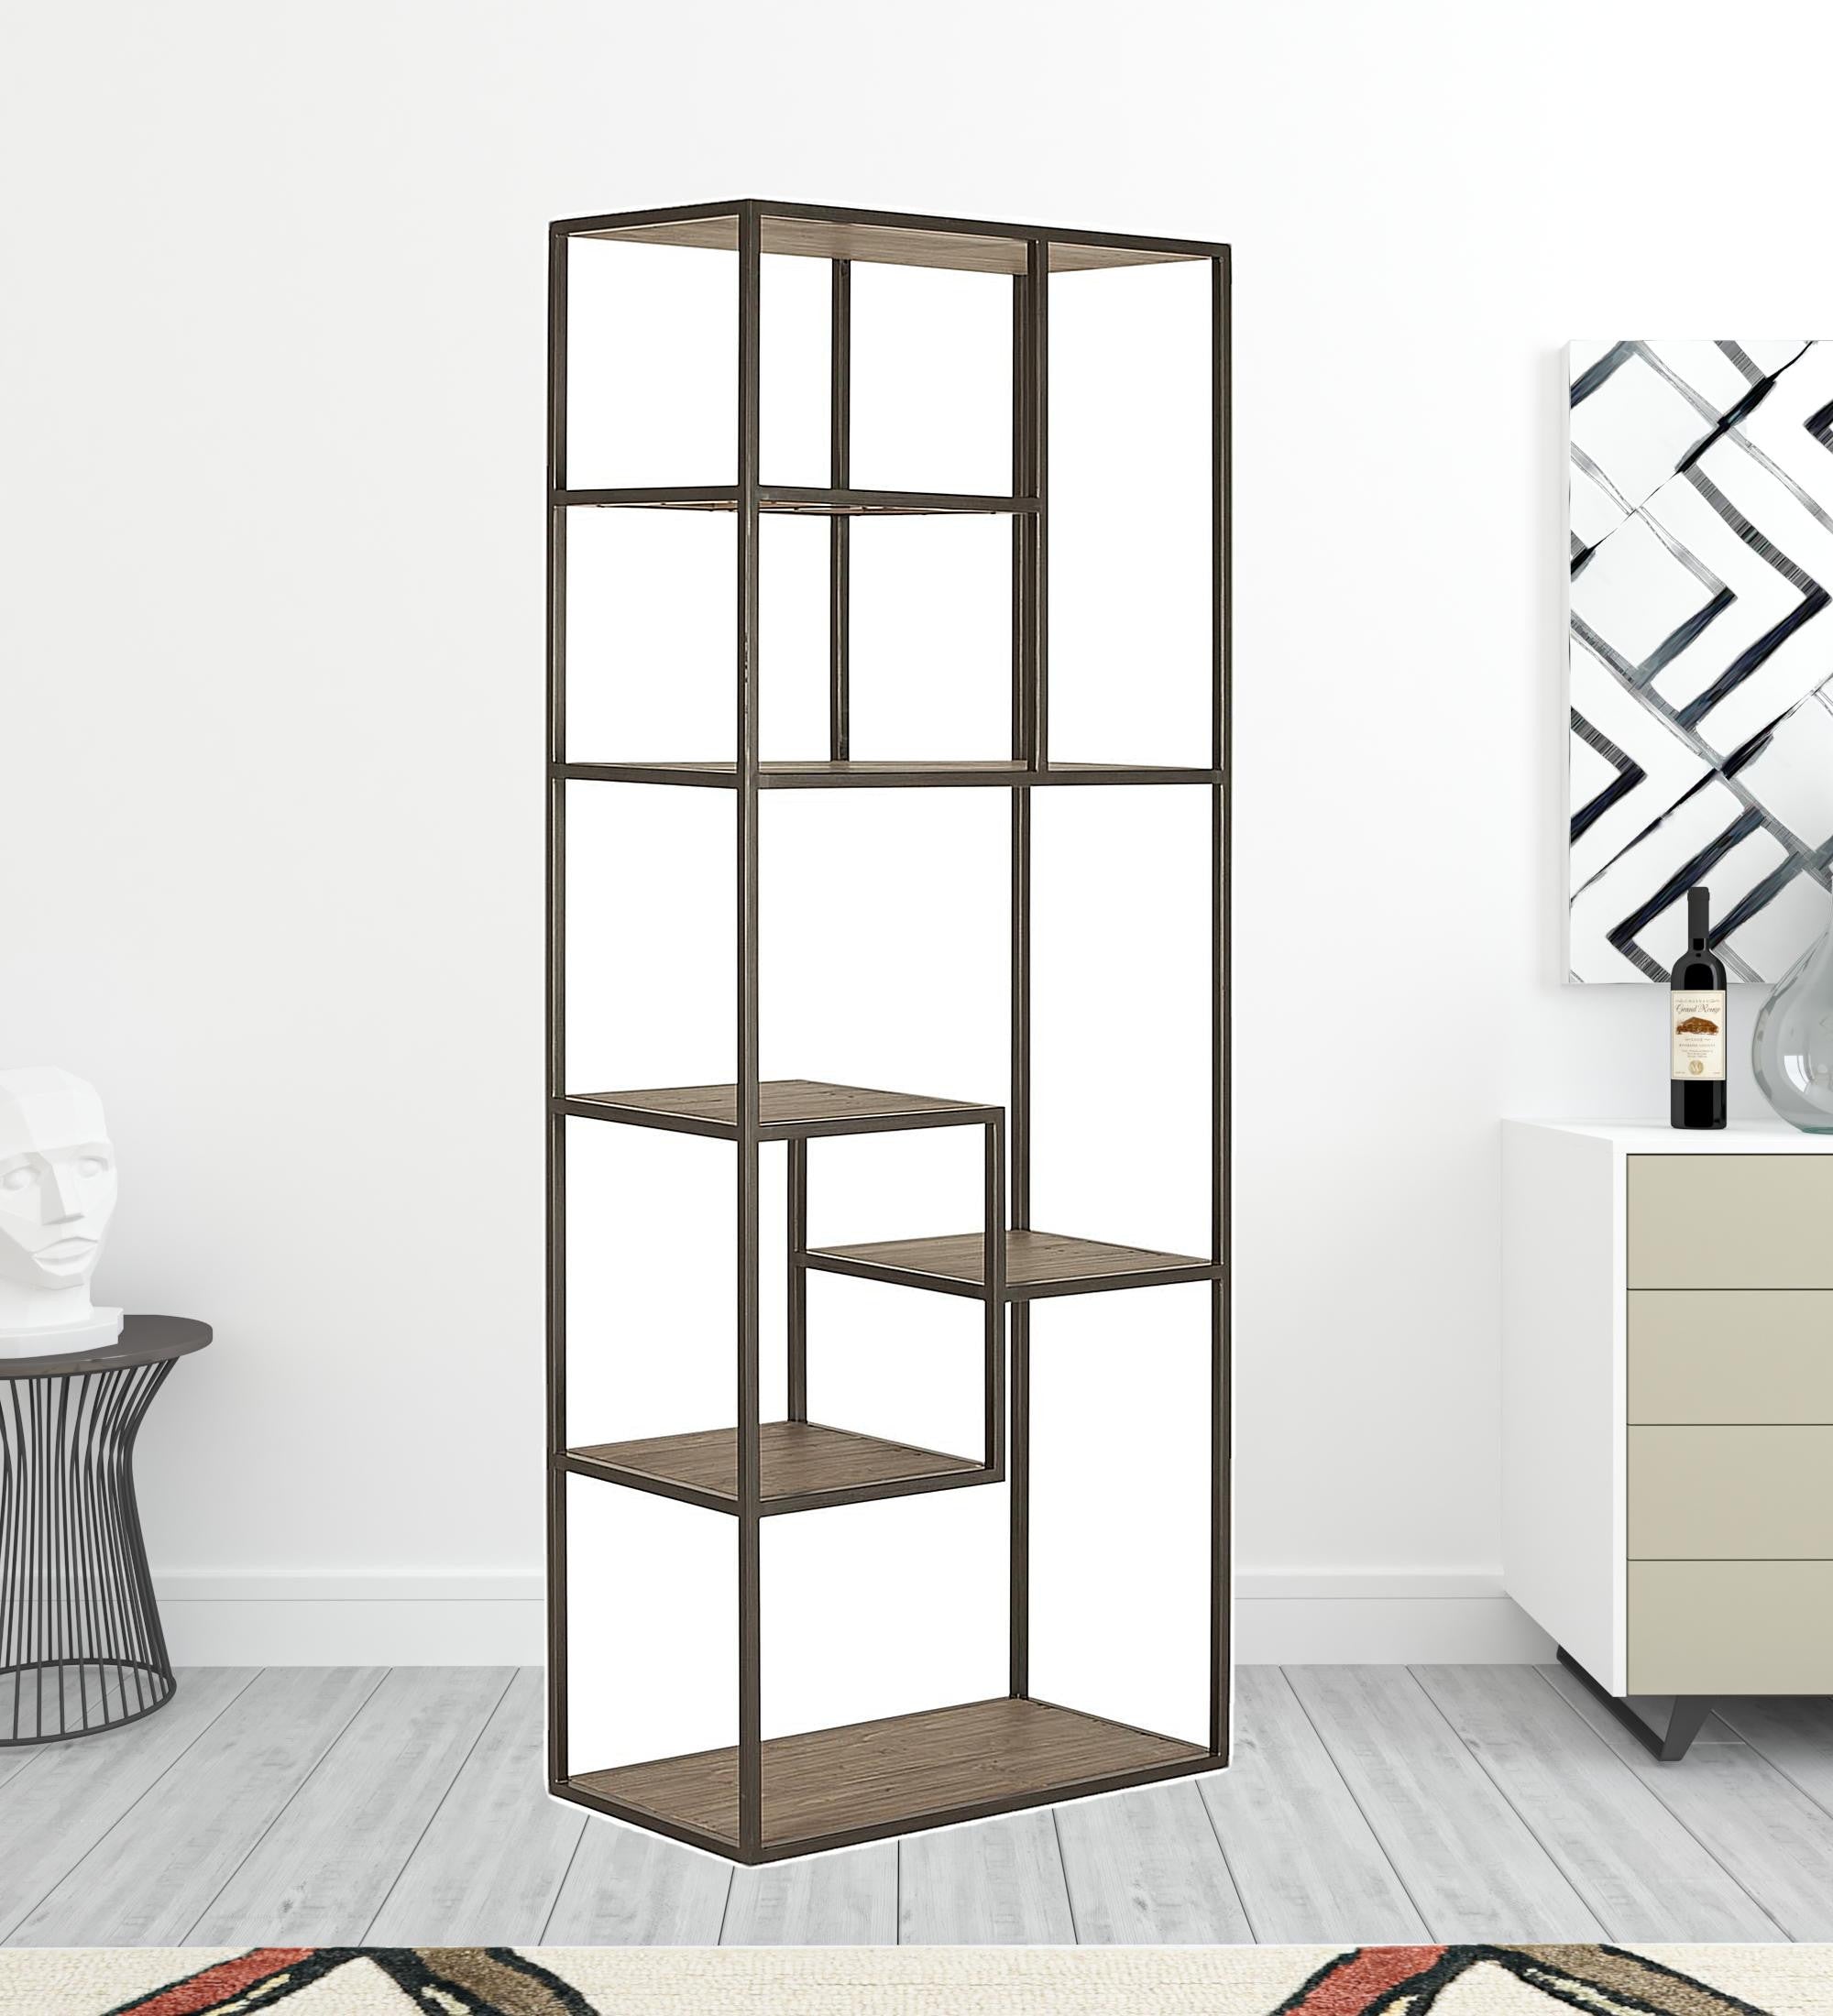 79" Reclaimed Wood and Metal Seven Tier Asymmetrical Bookcase